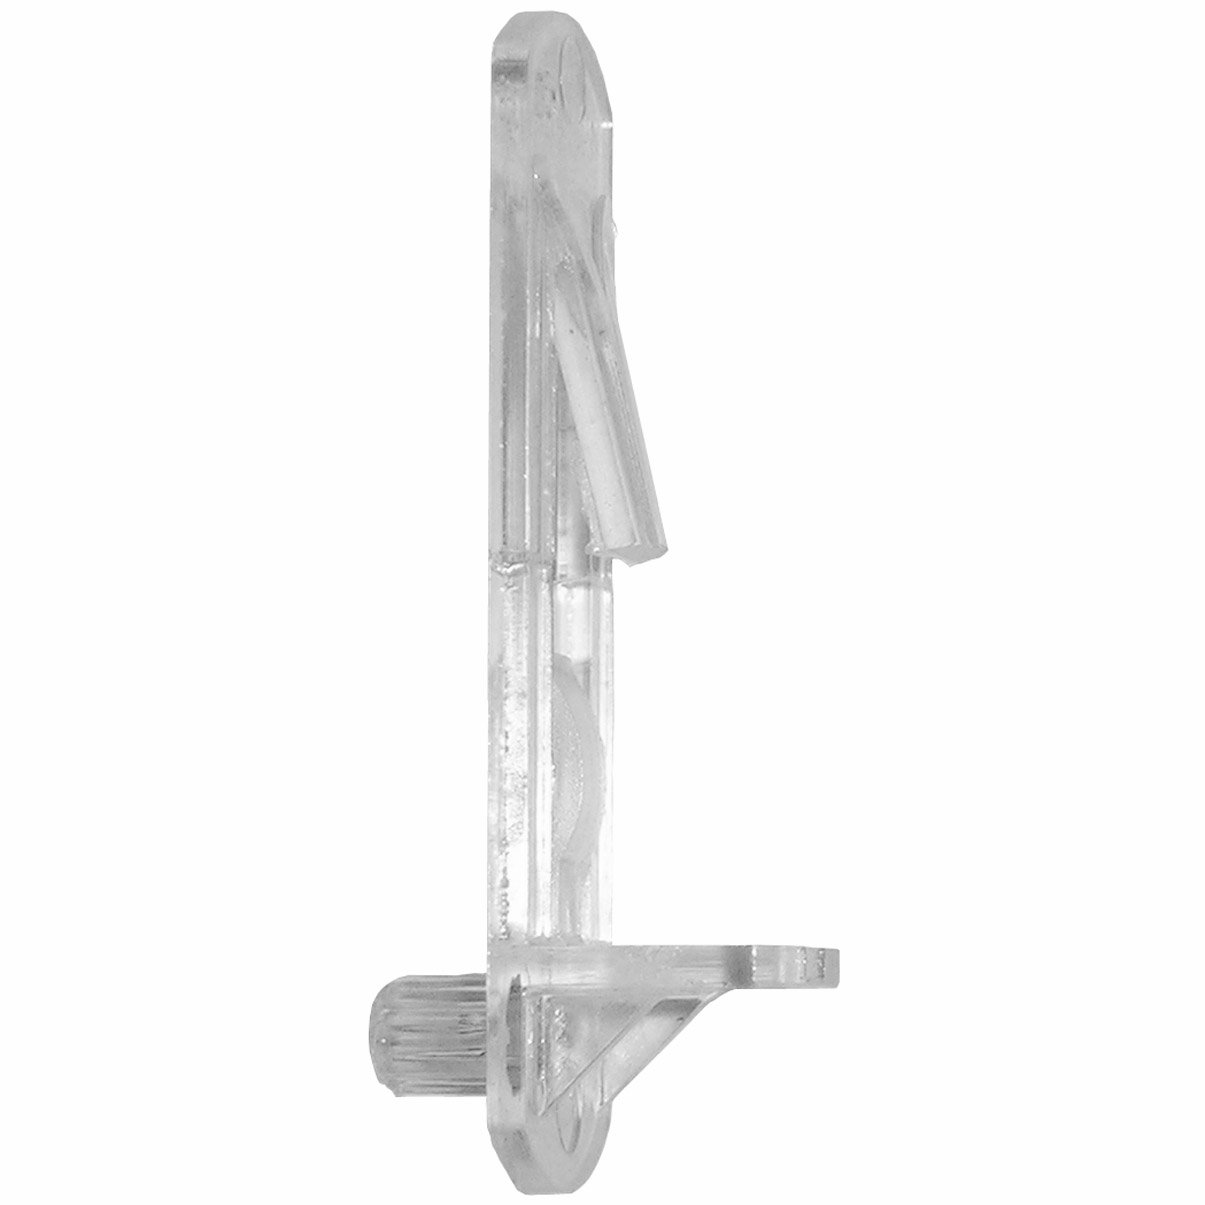 1/4" Post Clear Plastic Shelf Support for 3/4" Thick Shelf, Locking Style (4 Pack)